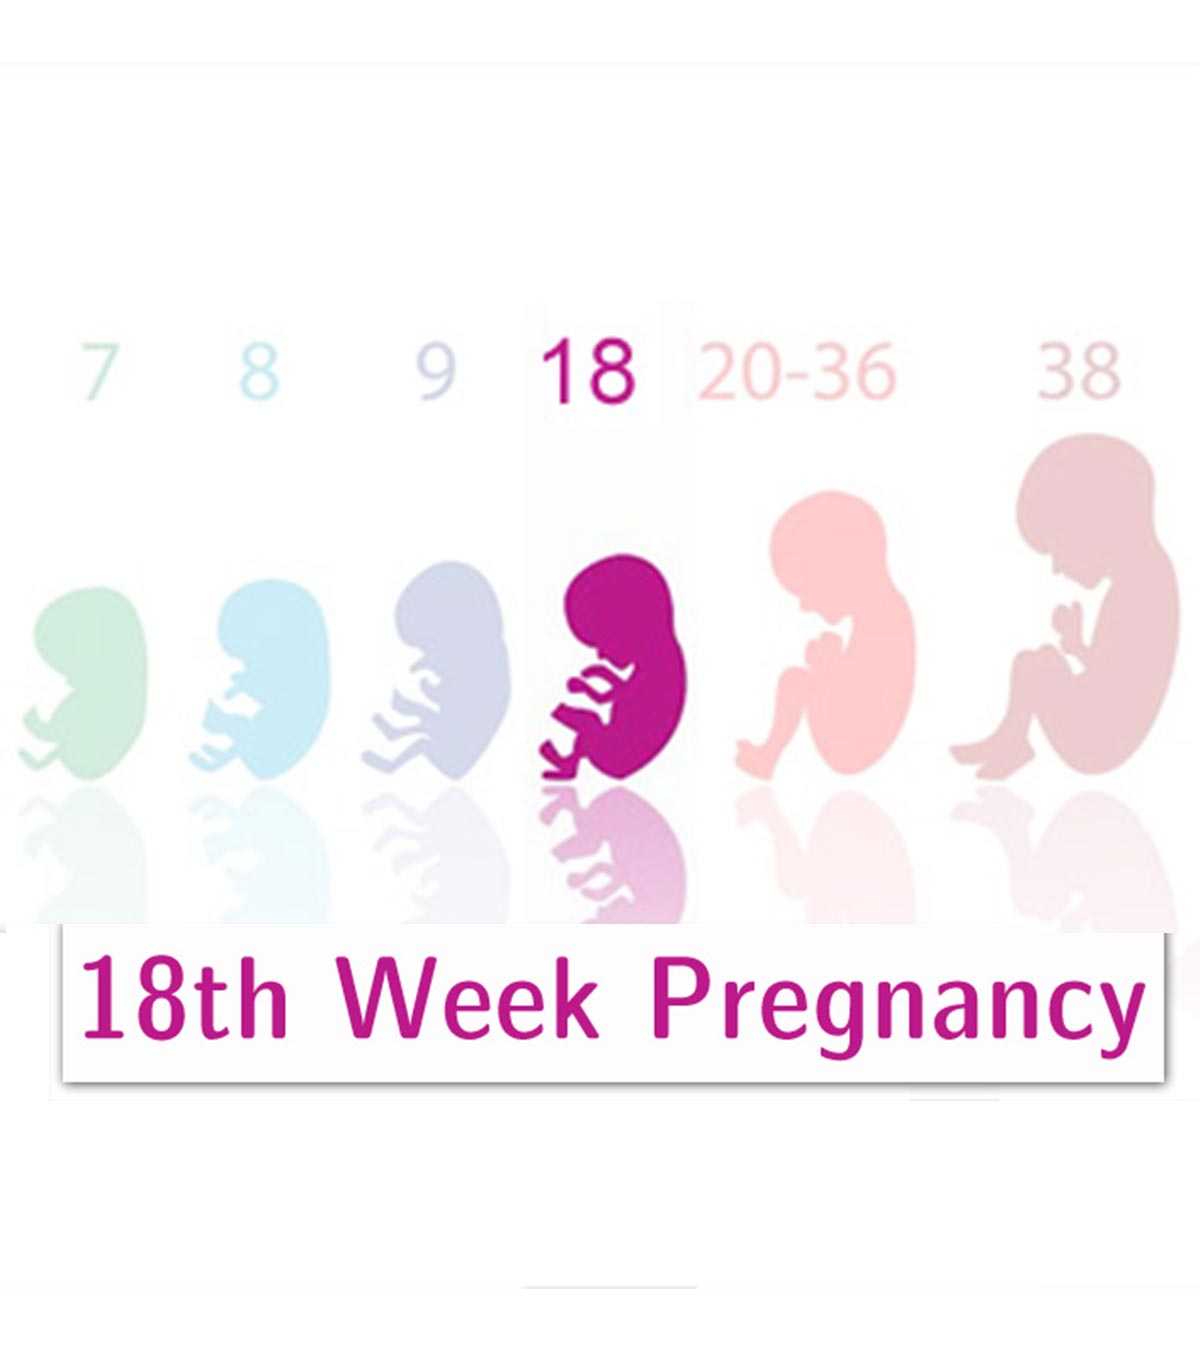 18th Week Pregnancy Symptoms, Baby Development, And Body Changes